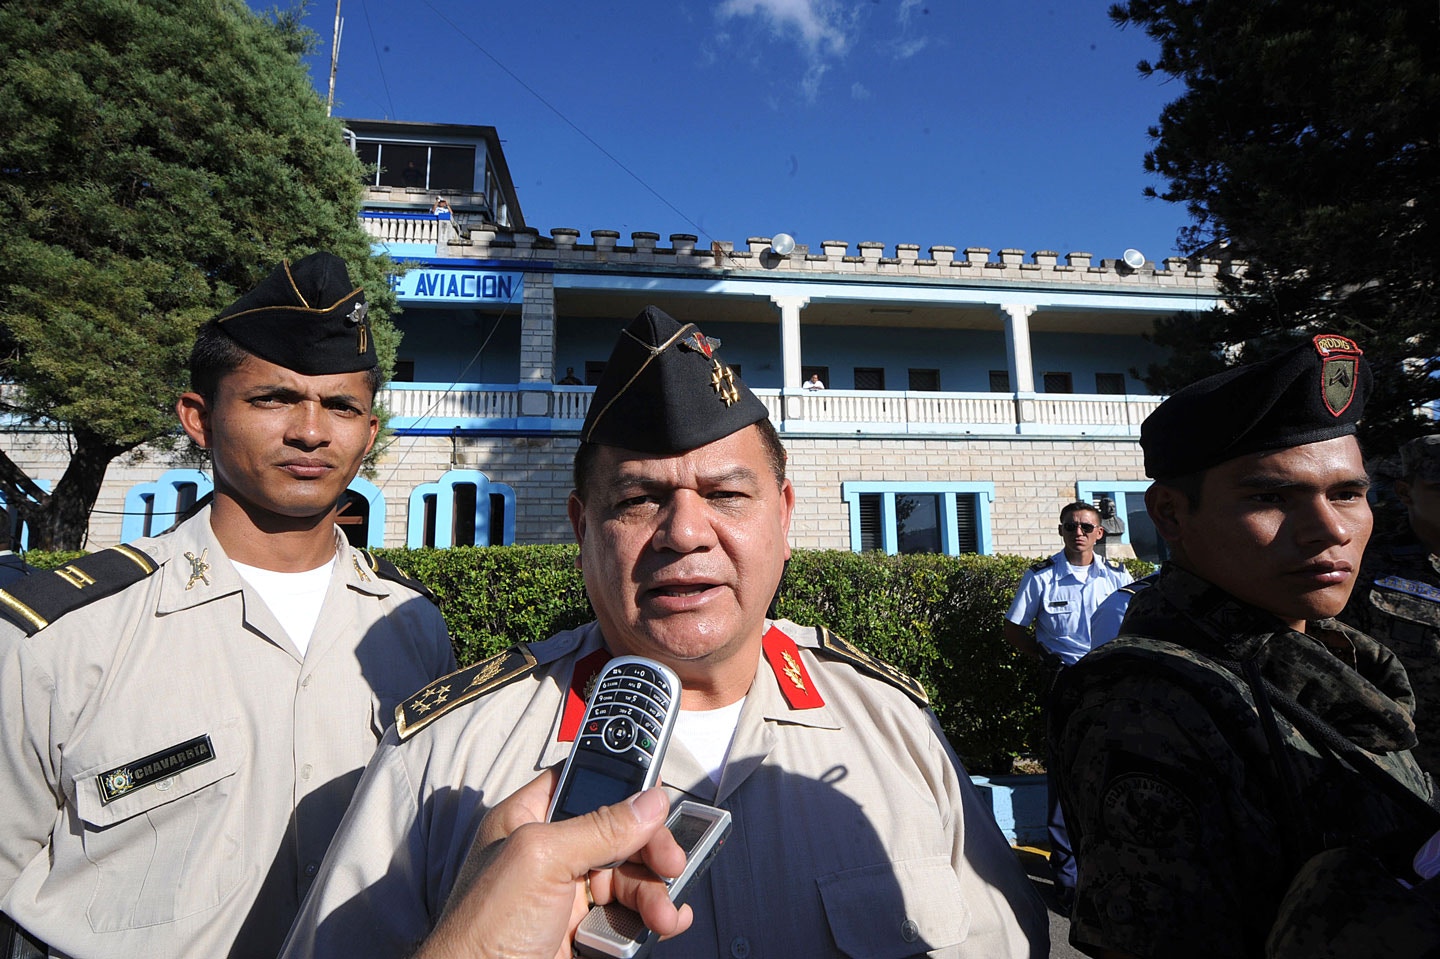 Honduran Chief of Joint Staff, Romeo Vasquez Velasquez (C), speaks to the press after overseeing the exit of ousted Honduran President Manuel Zelaya aboard the aircraft of Dominican President Leonel Fernandez in Tegucigalpa January 27, 2010. Zelaya and his family left Honduras Wednesday bound for the Dominican Republic after more than four months holed up in Brazil's embassy. The jet took off at 2135 GMT from the Tontontin airport amid hopes that the swearing-in of newly elected President Porfirio Lobo earlier in the day could end the turmoil triggered by Zelaya's June overthrow. AFP PHOTO/STR (Photo credit should read STR/AFP/Getty Images)